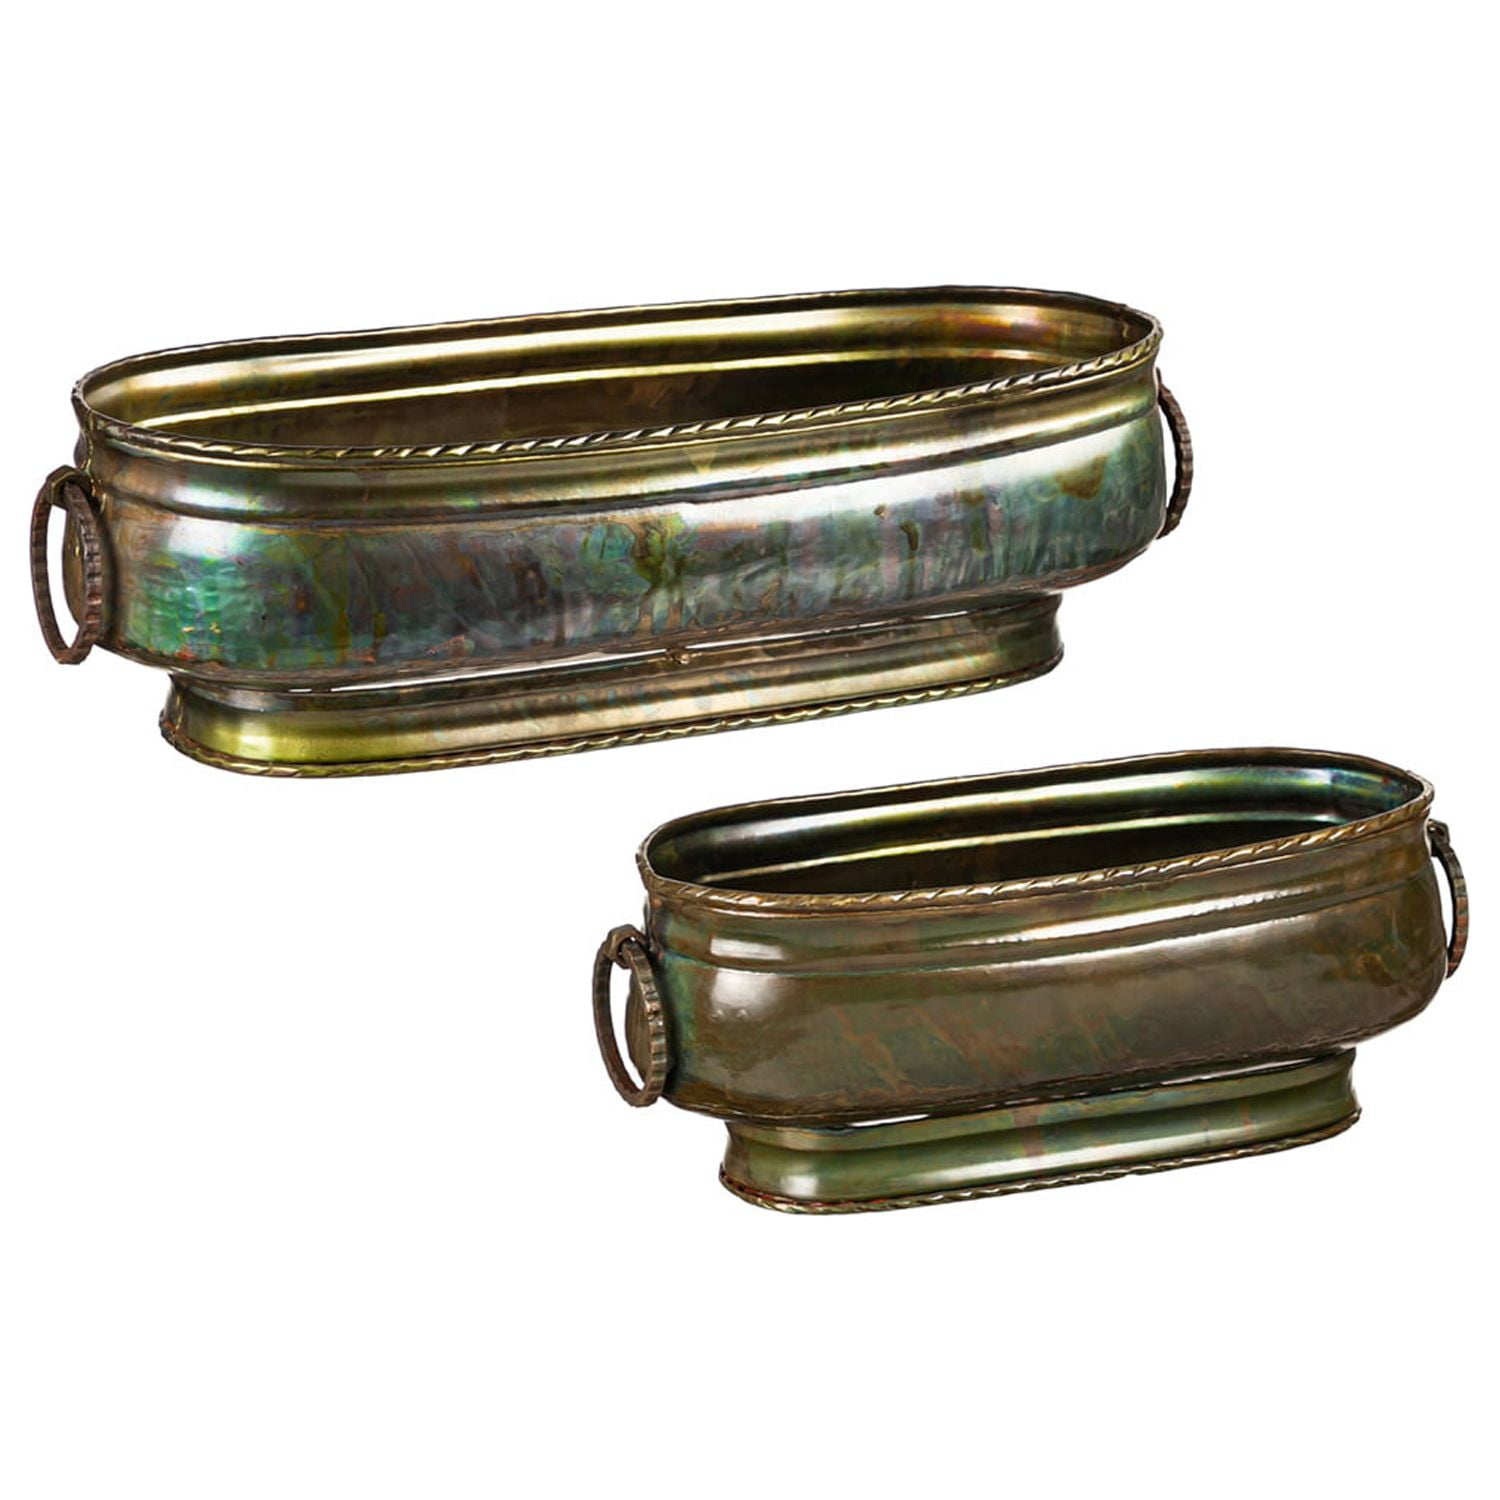 Nested Aged Brass Patina Finished Trough Planters, Set of 2 